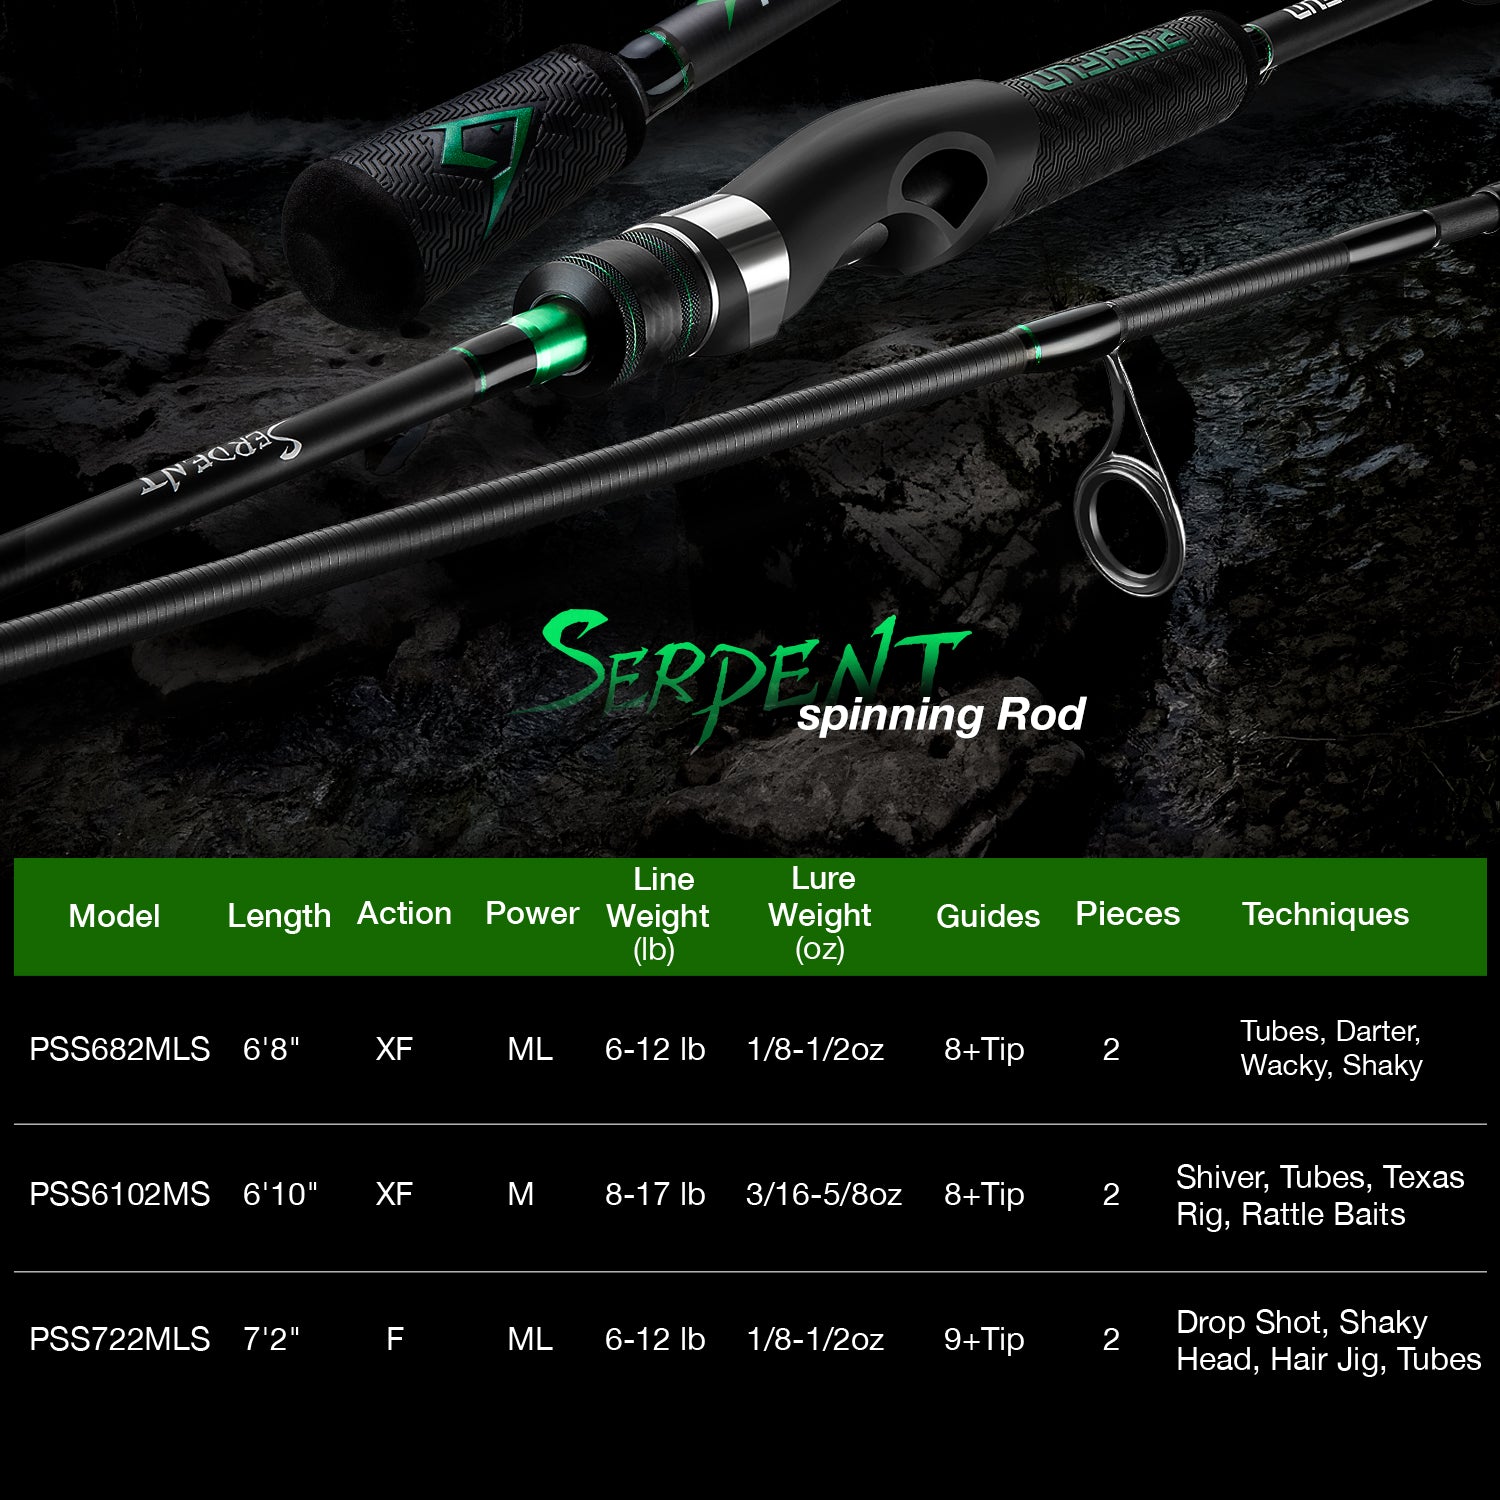 Piscifun Serpent Spinning Rod with Fuji Line Guides - IM7 Carbon Blank  Tournament Performance Spinning Fishing Rod, Durable Sensitive One Piece &  Two